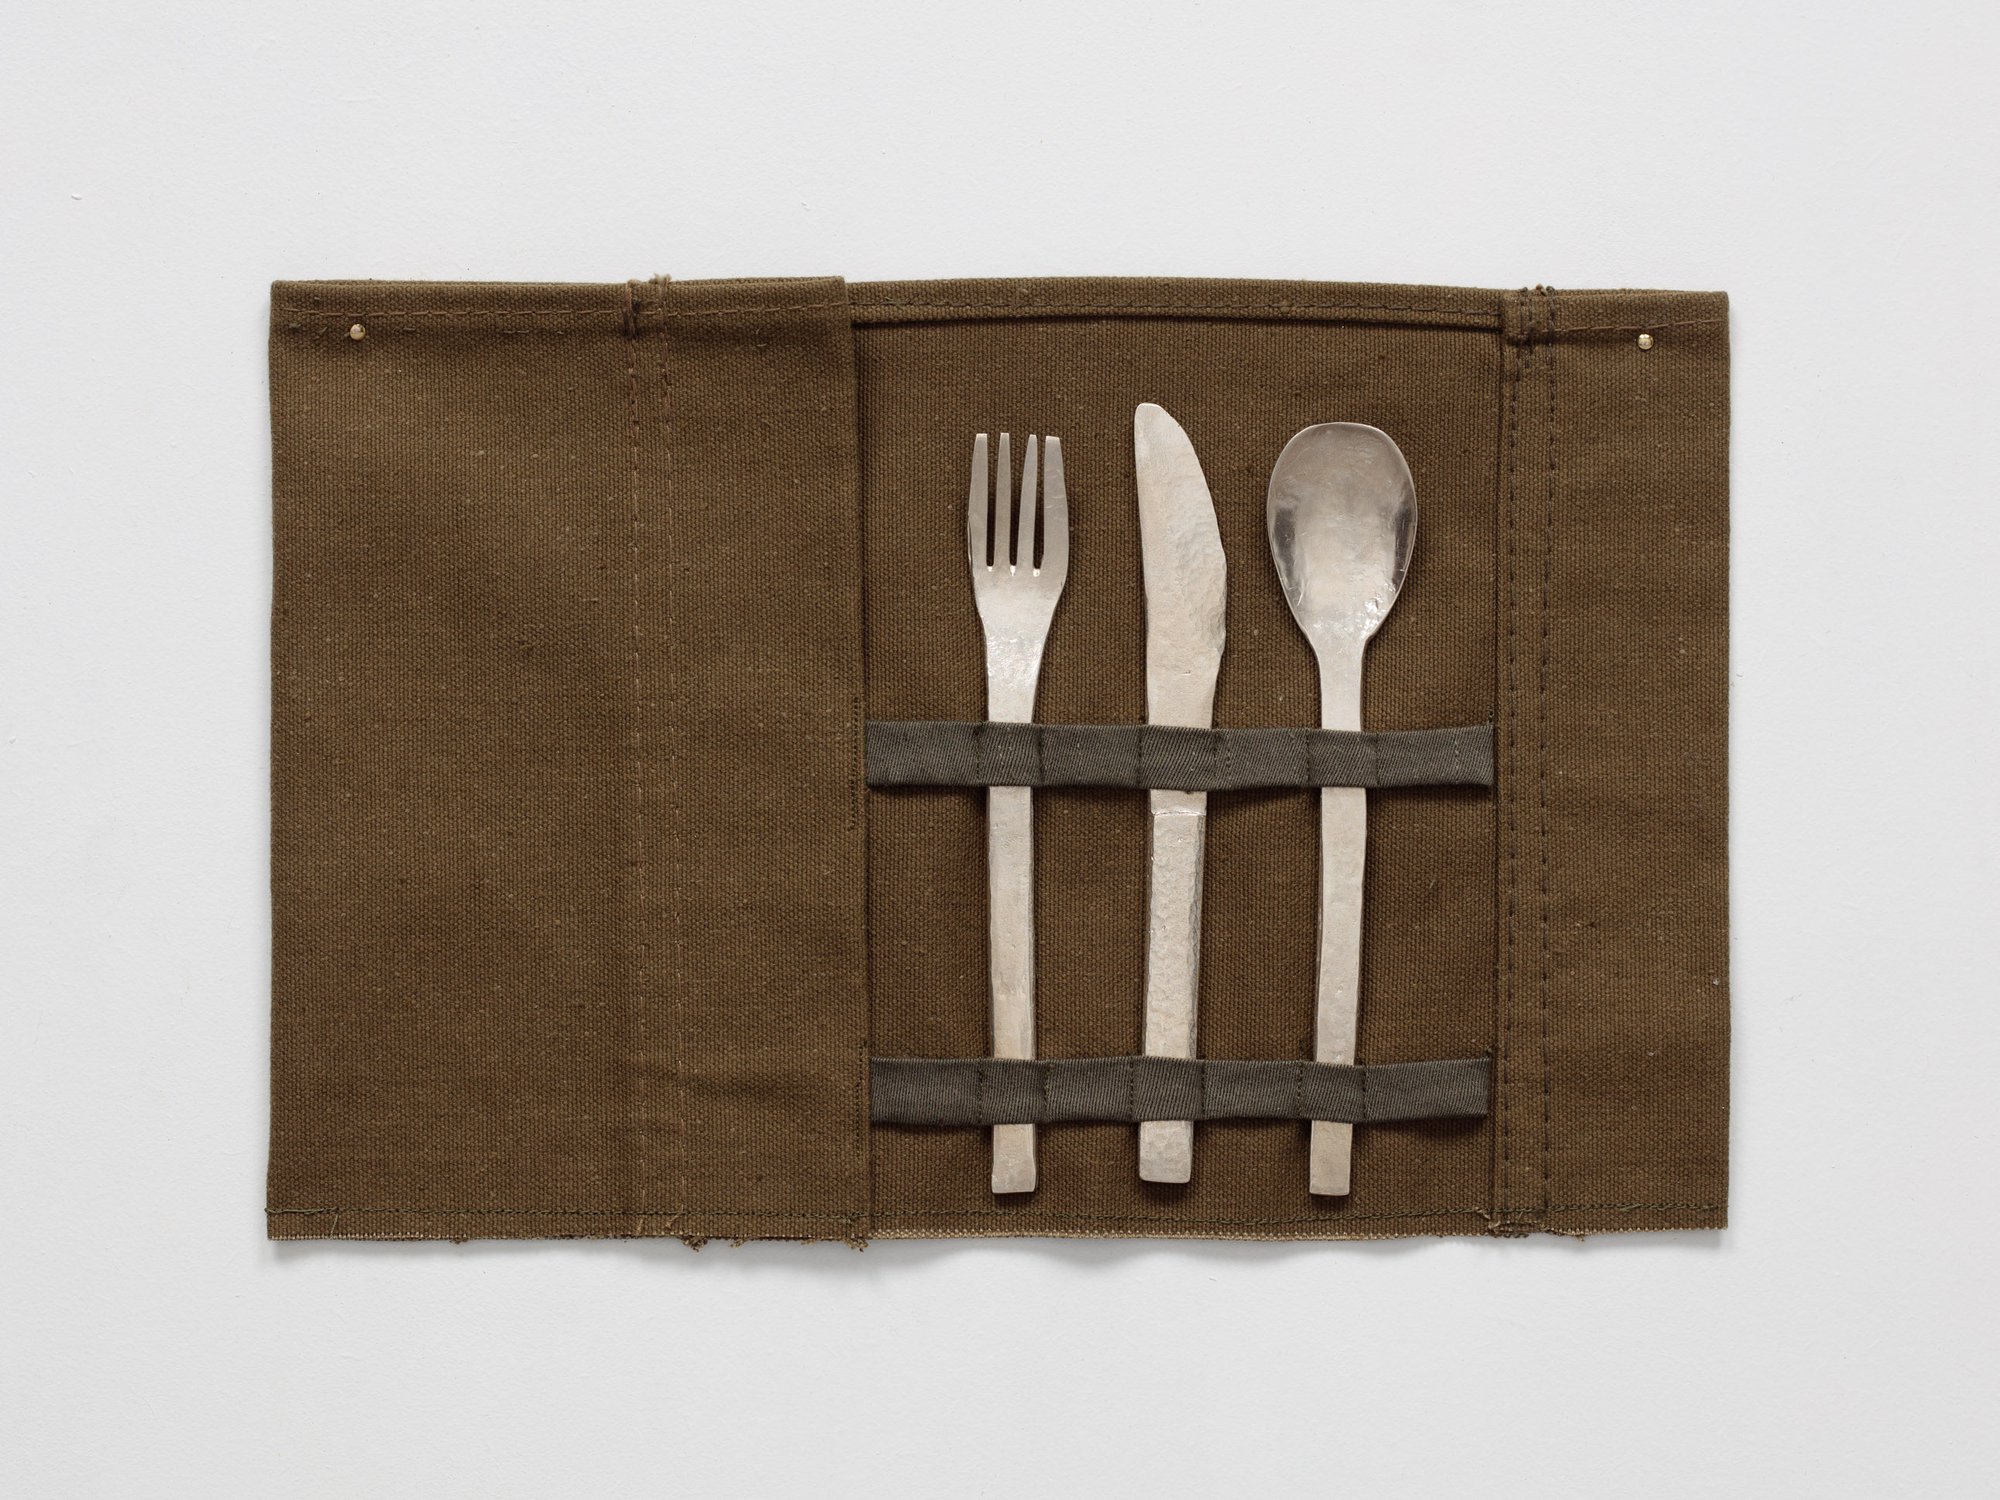 Sidsel Meineche Hansen, home vs owner, cutlery cast in silver, fabric support made by Louis Backhouse, 25 x 43 cm, 2020